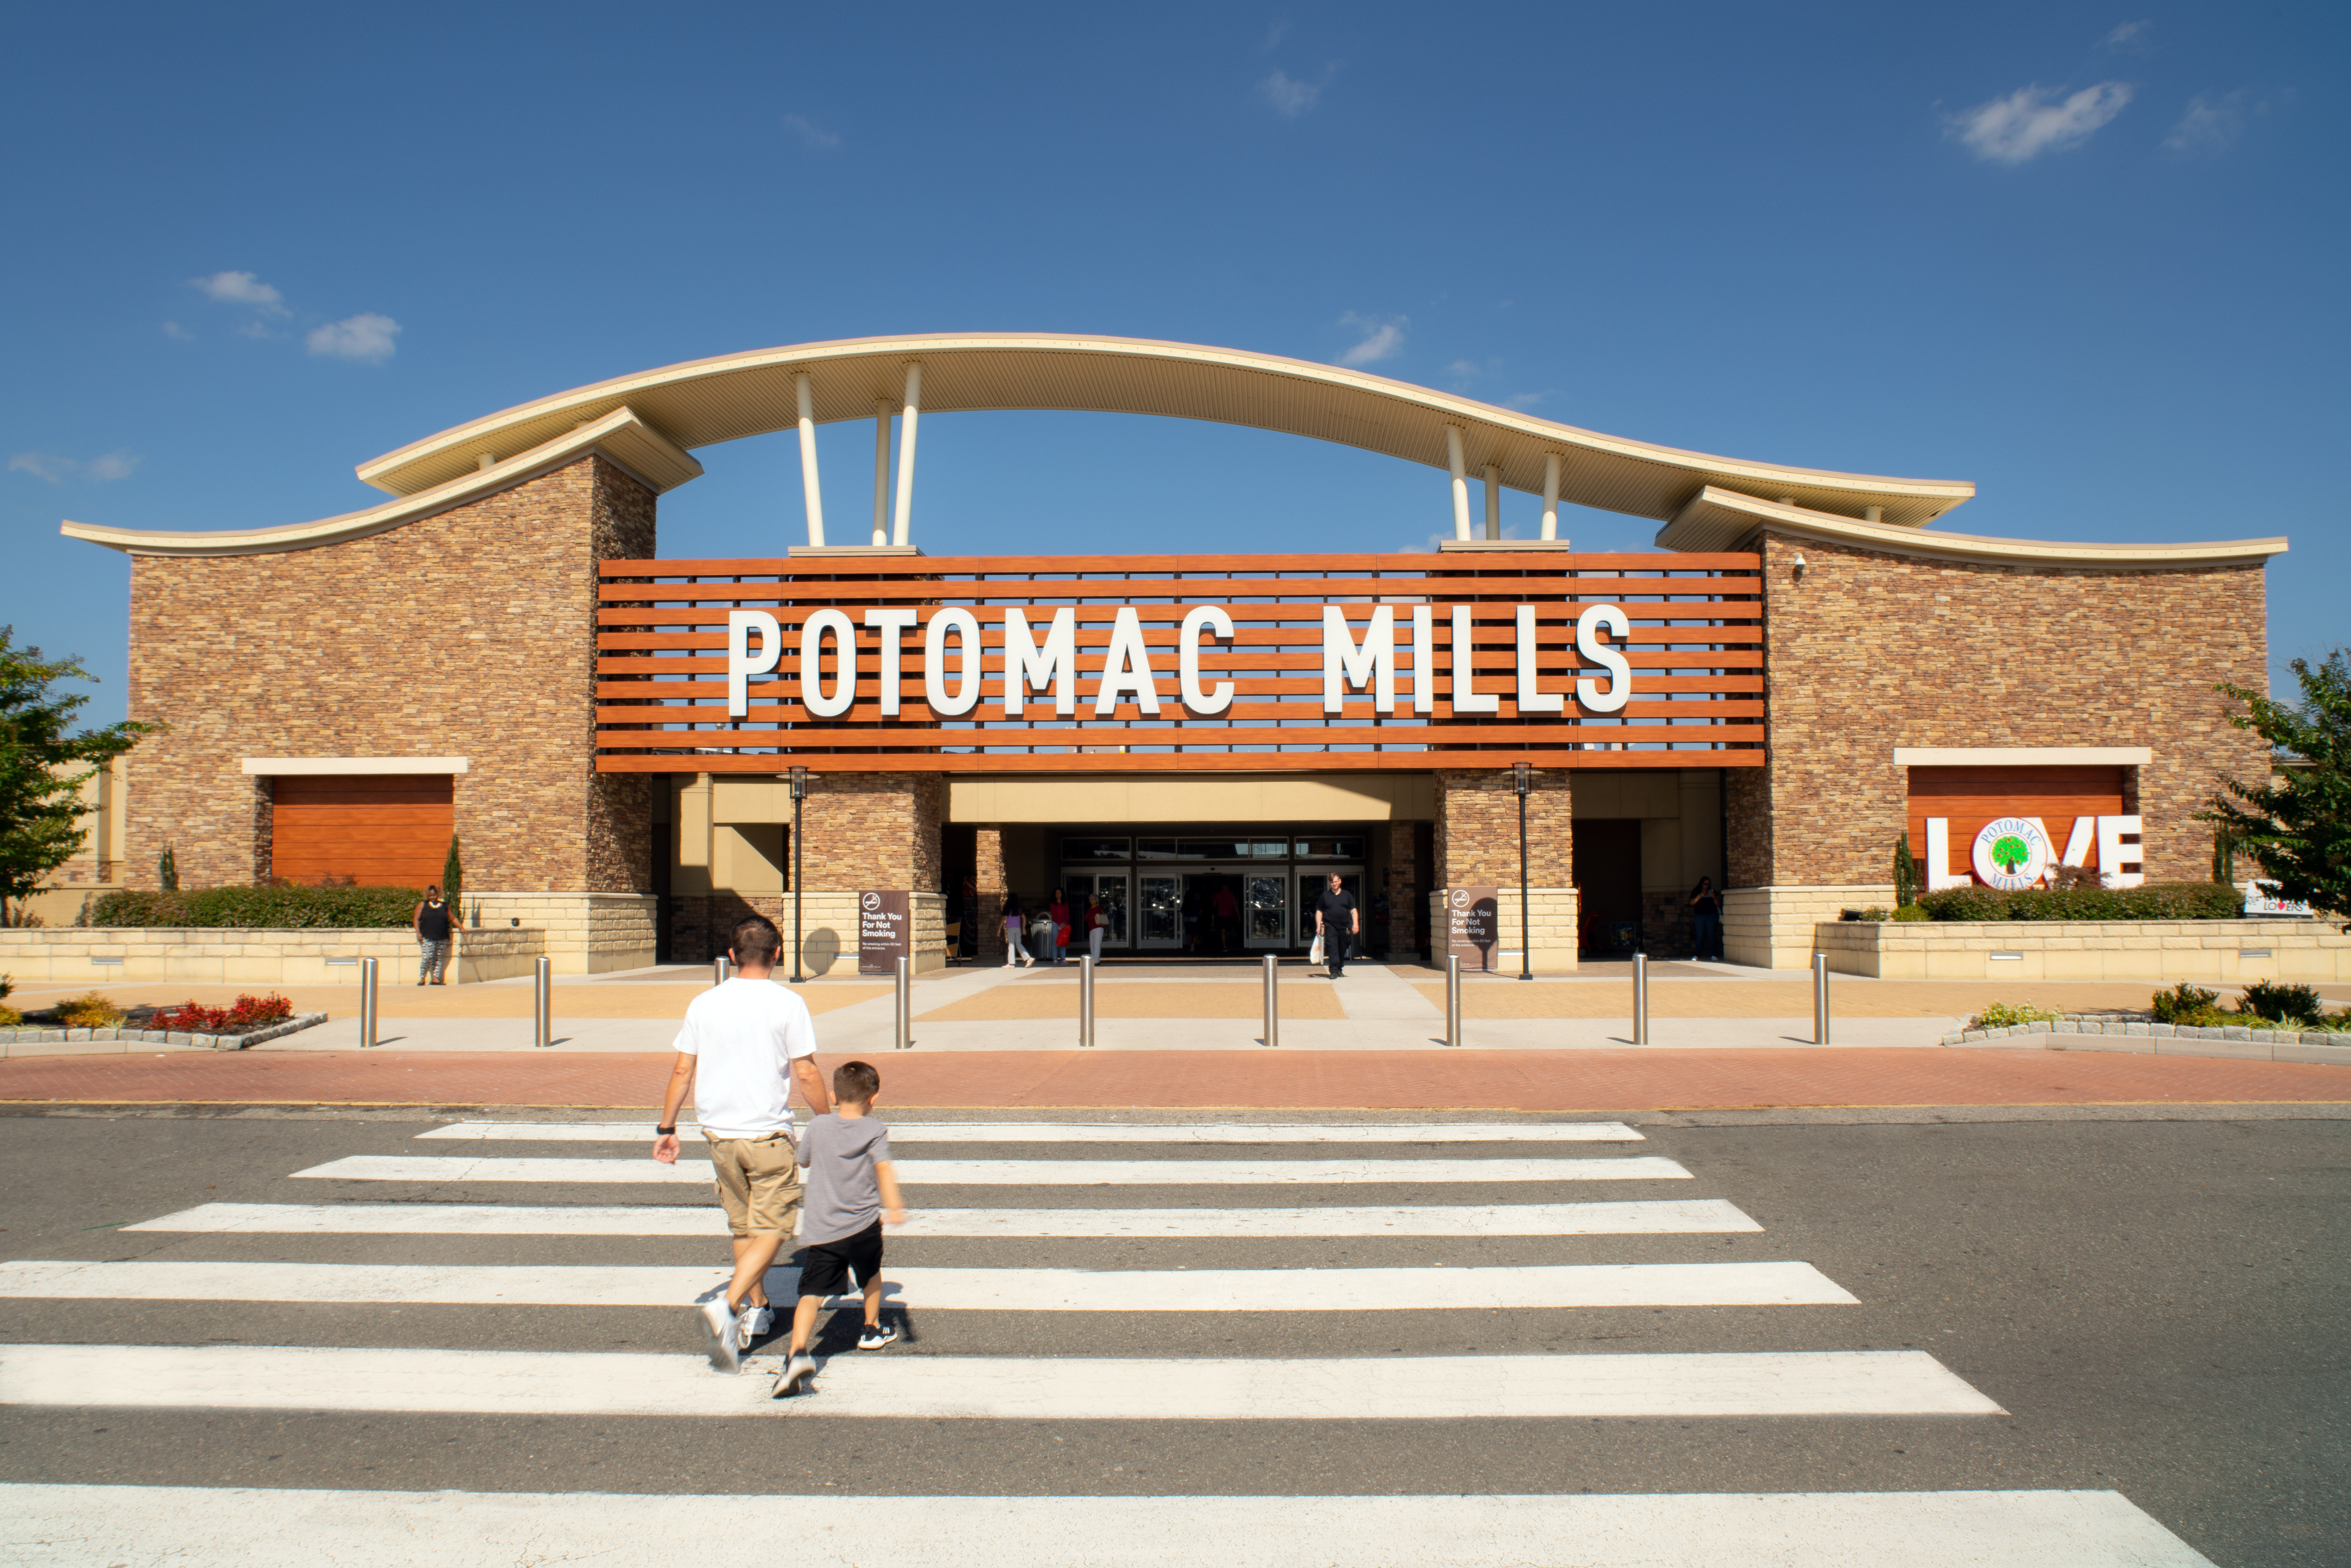 How to get to Potomac Mills by Bus or Metro?